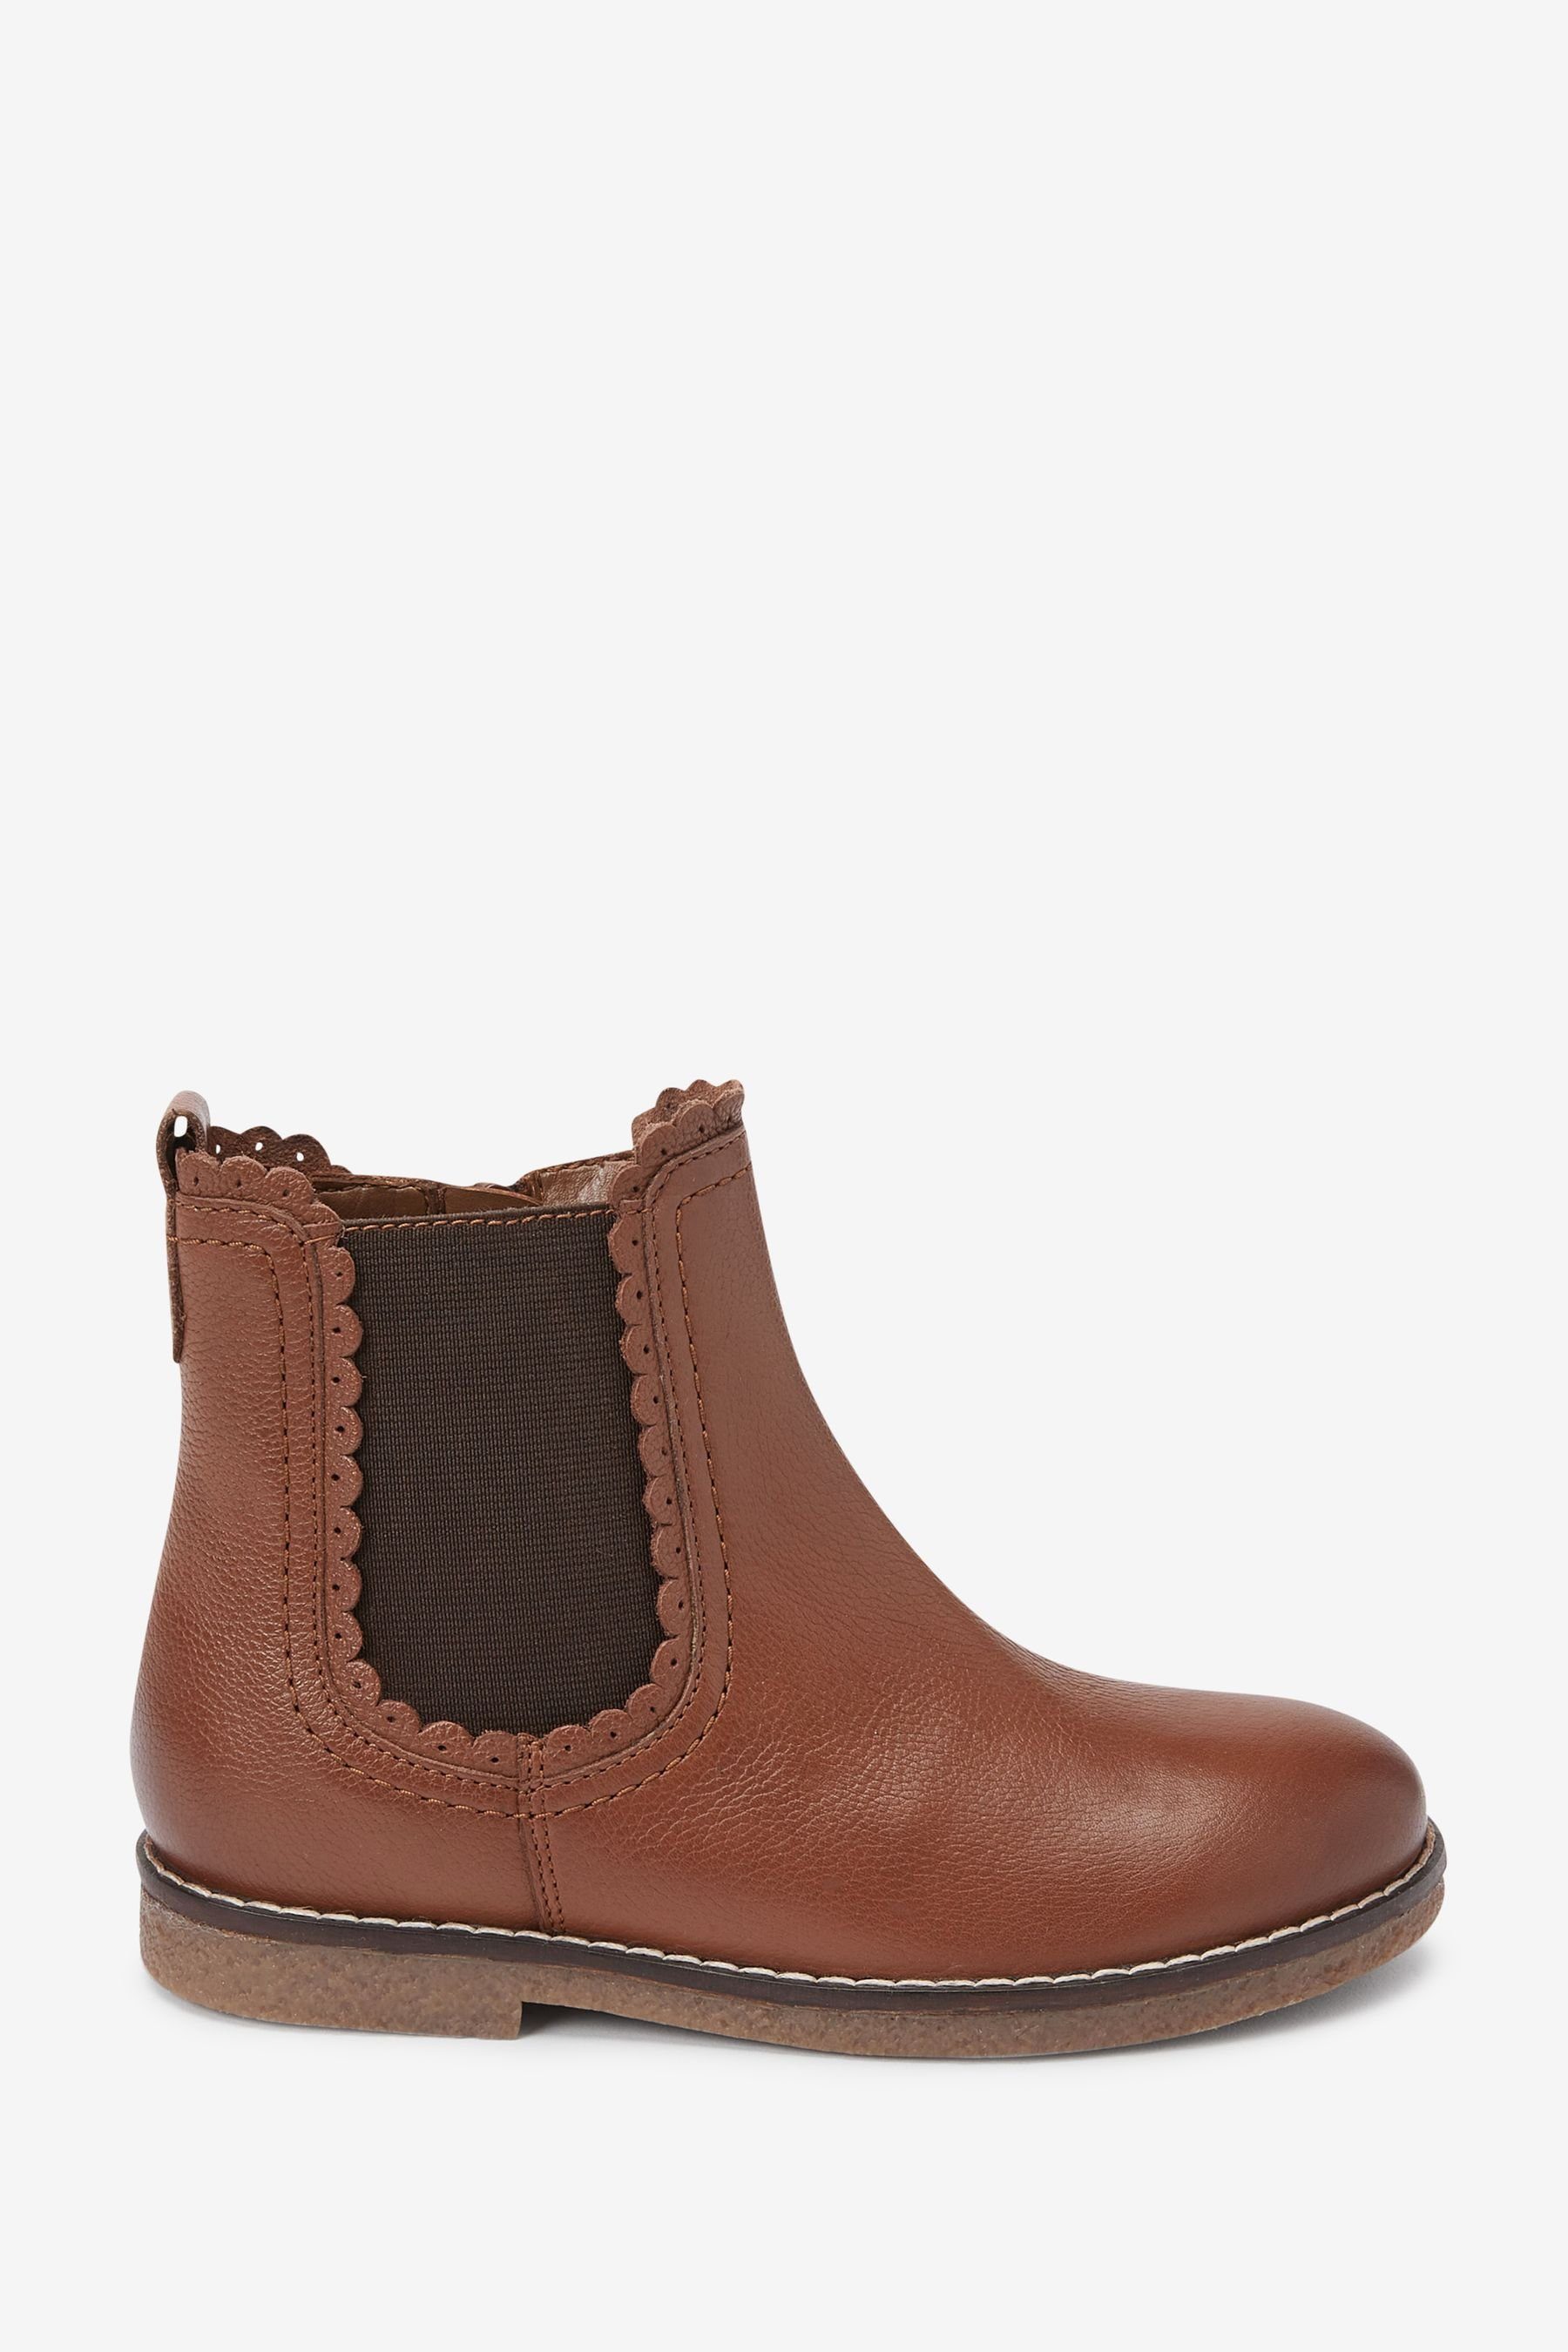 Next Premium Stiefelette Chelseaboots (1-tlg) Tan Brown Leather Scallop